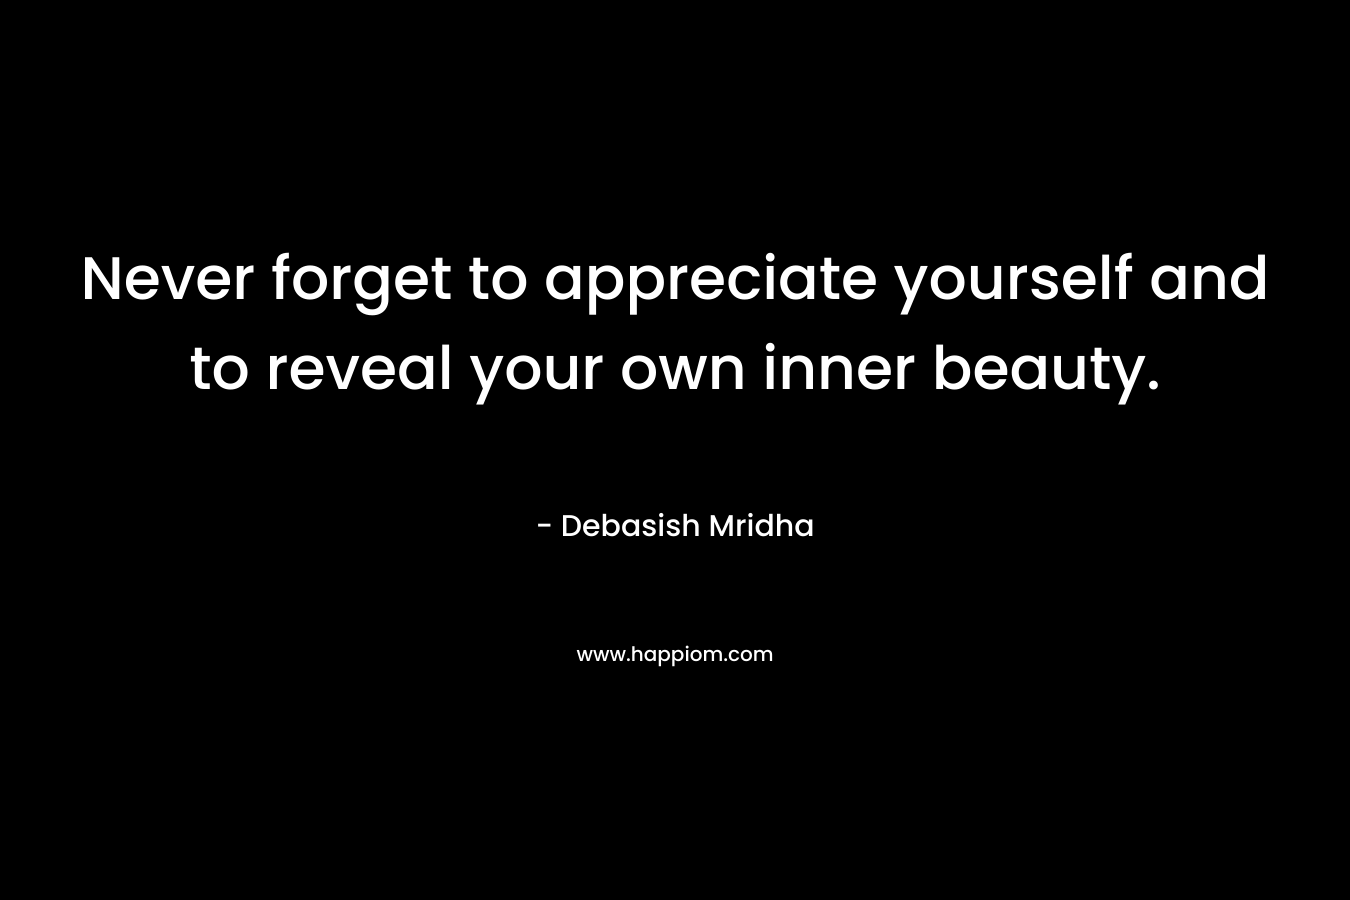 Never forget to appreciate yourself and to reveal your own inner beauty.